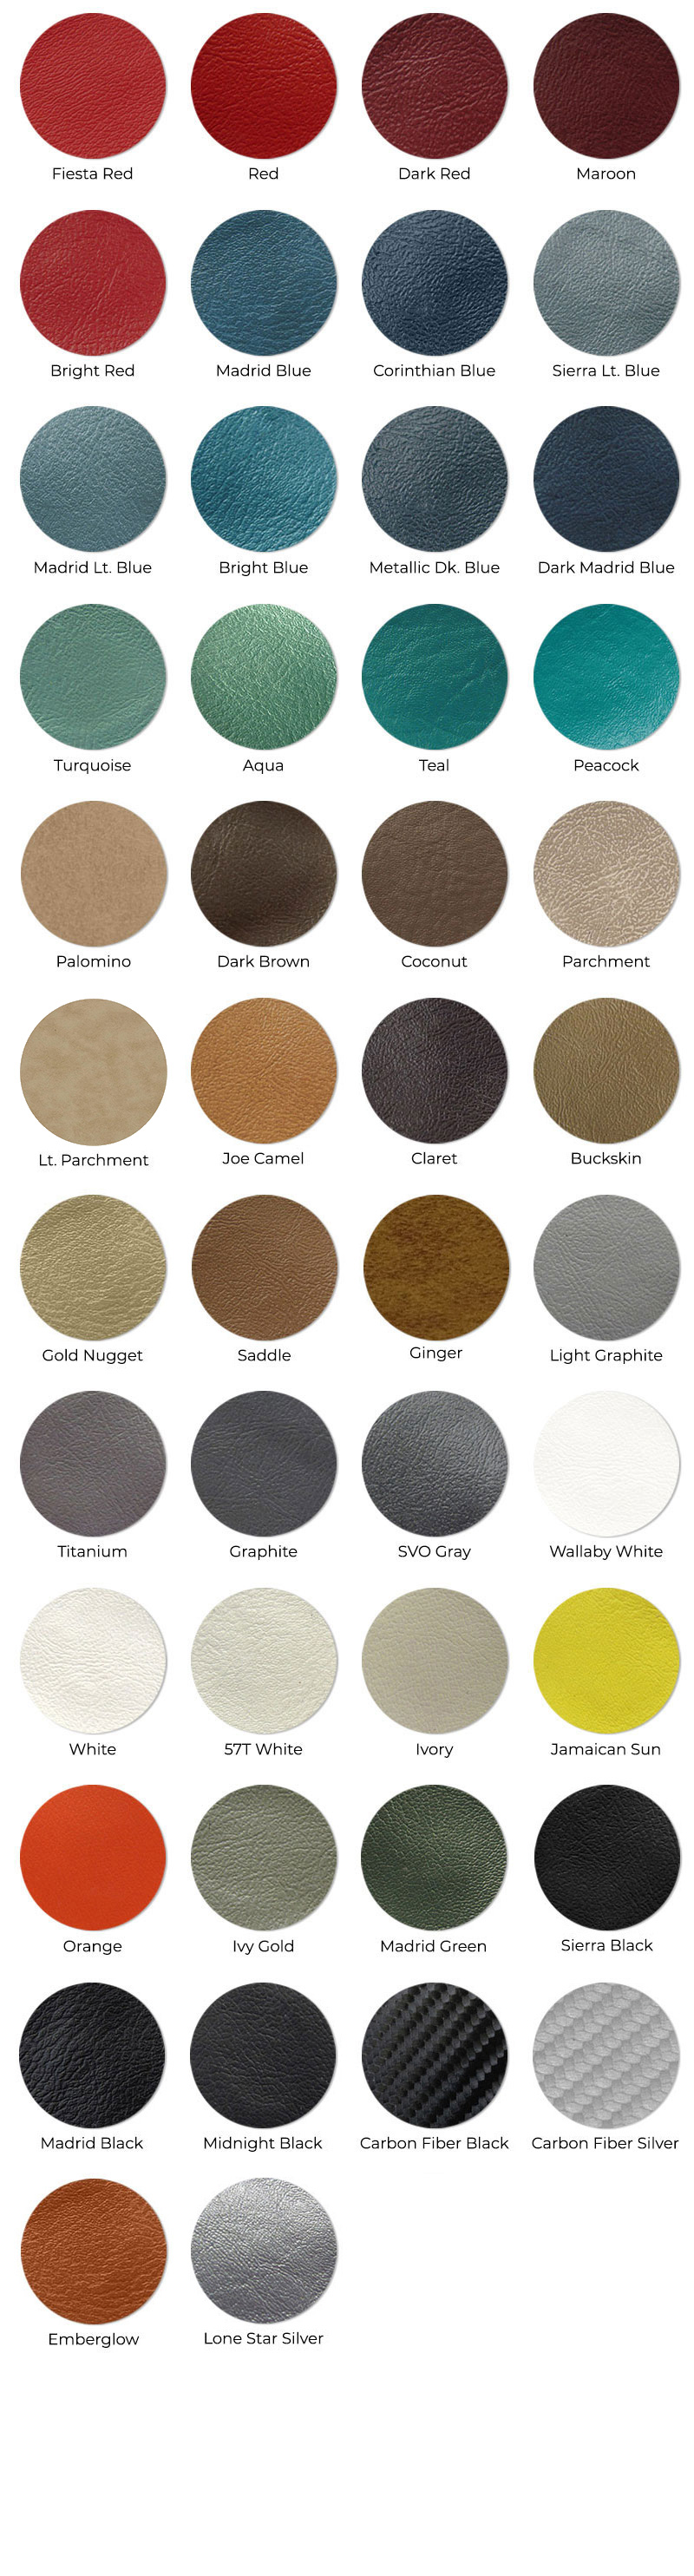 CupholdersPlus Color Swatches - Mobile View